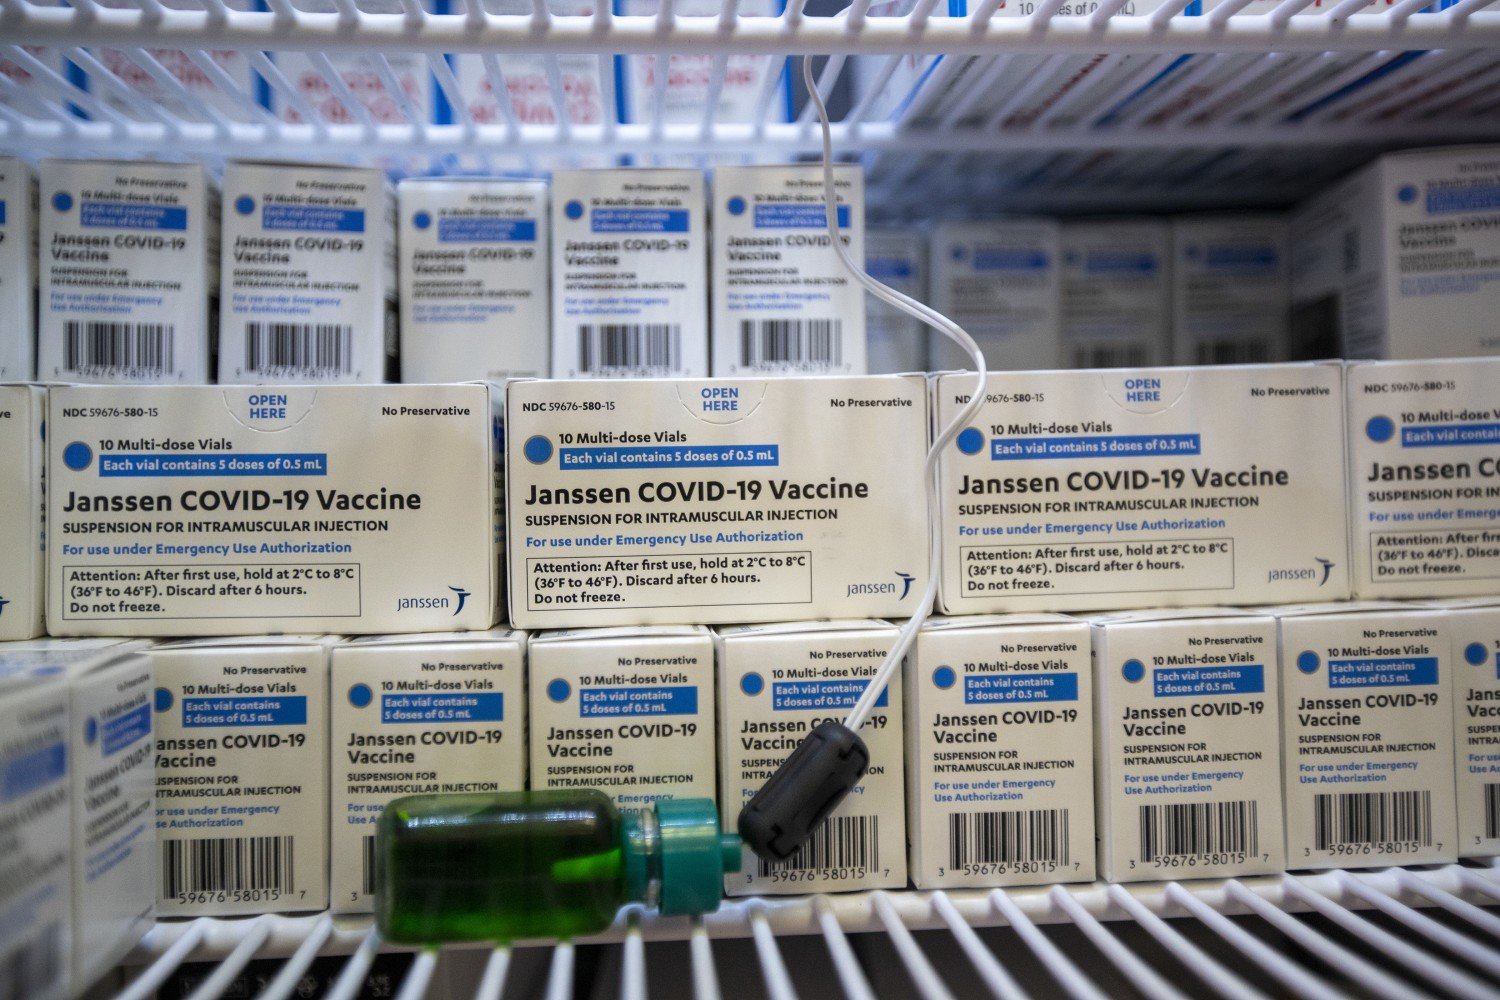 More than 13 million people have received the Johnson & Johnson vaccine for COVID-19. (Allen J. Schaben/Los Angeles Times/TNS)